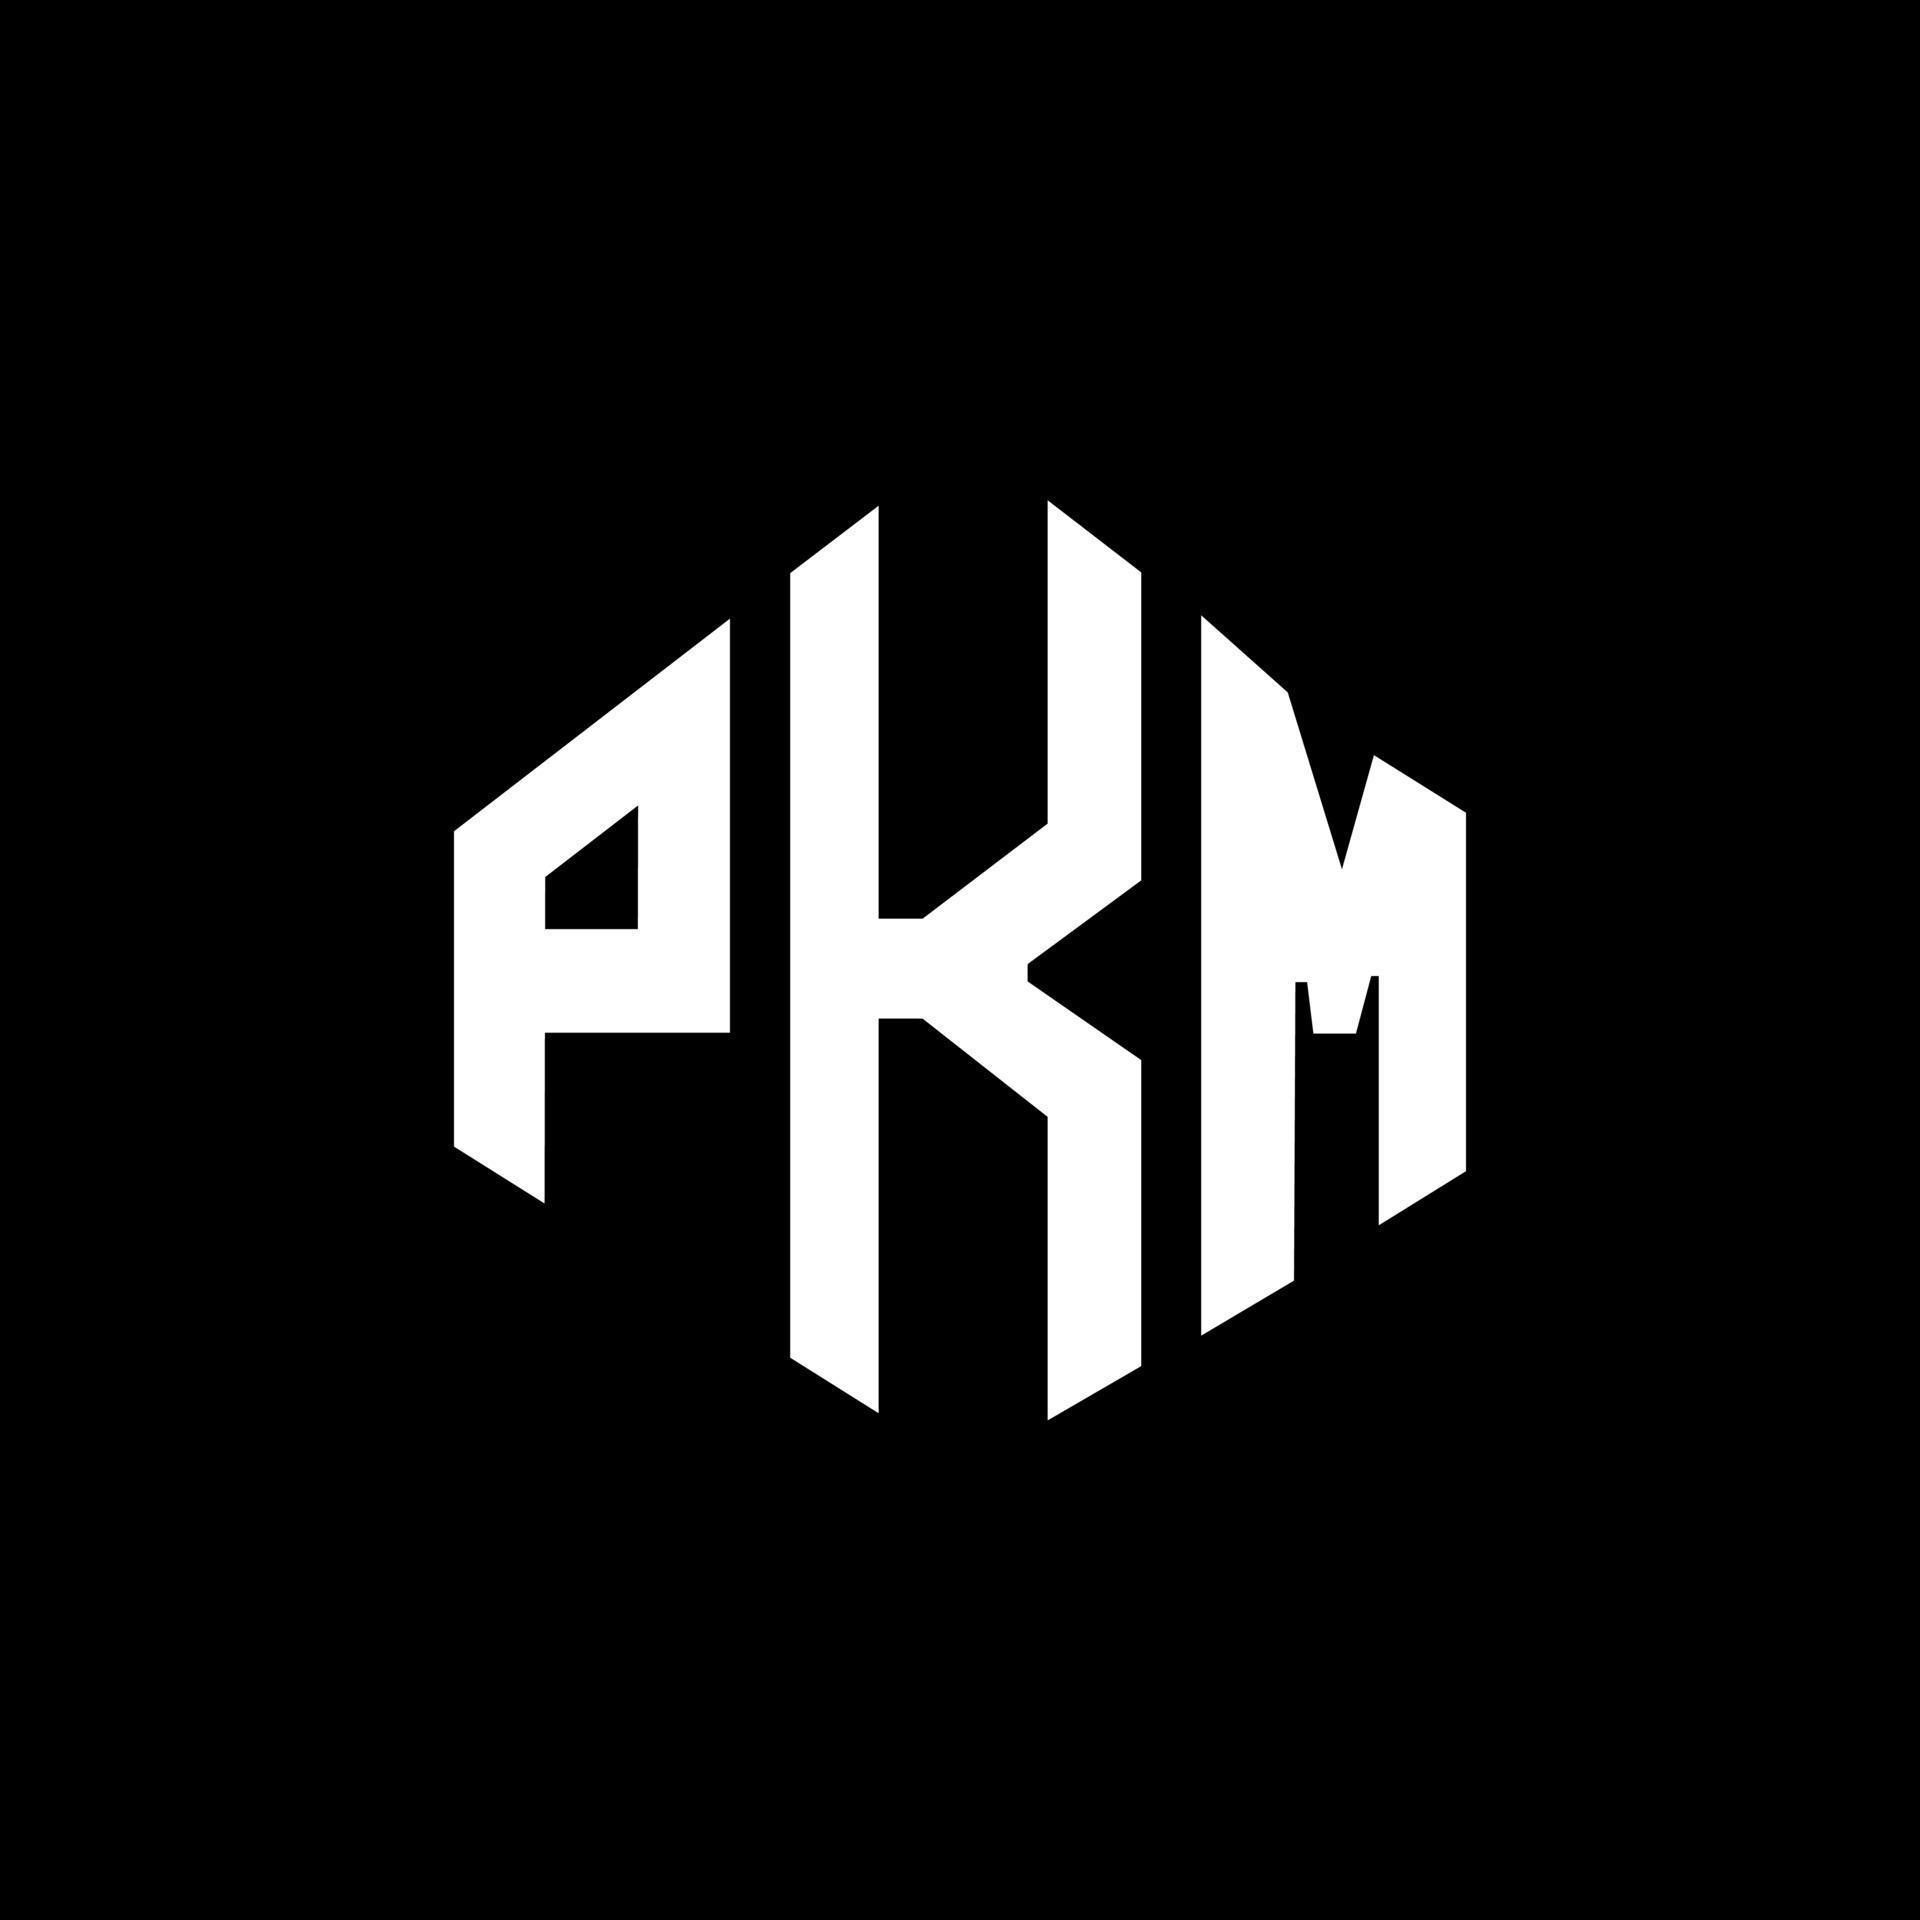 PKM letter logo design with polygon shape. PKM polygon and cube shape ...